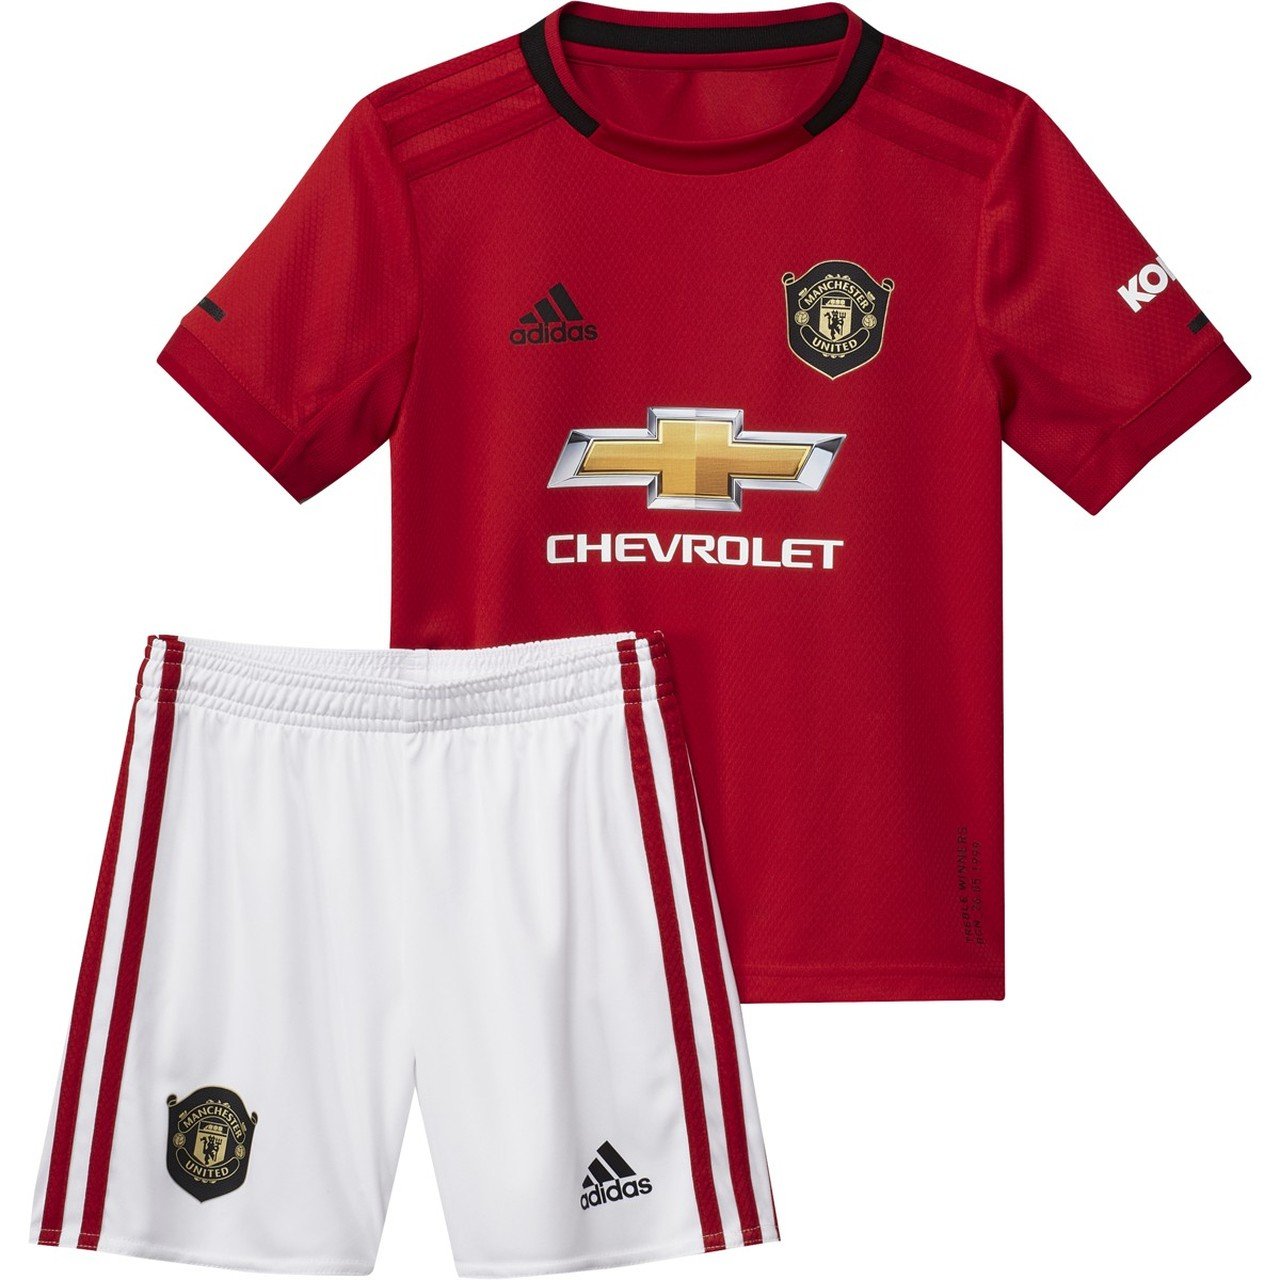 manchester united jersey and shorts